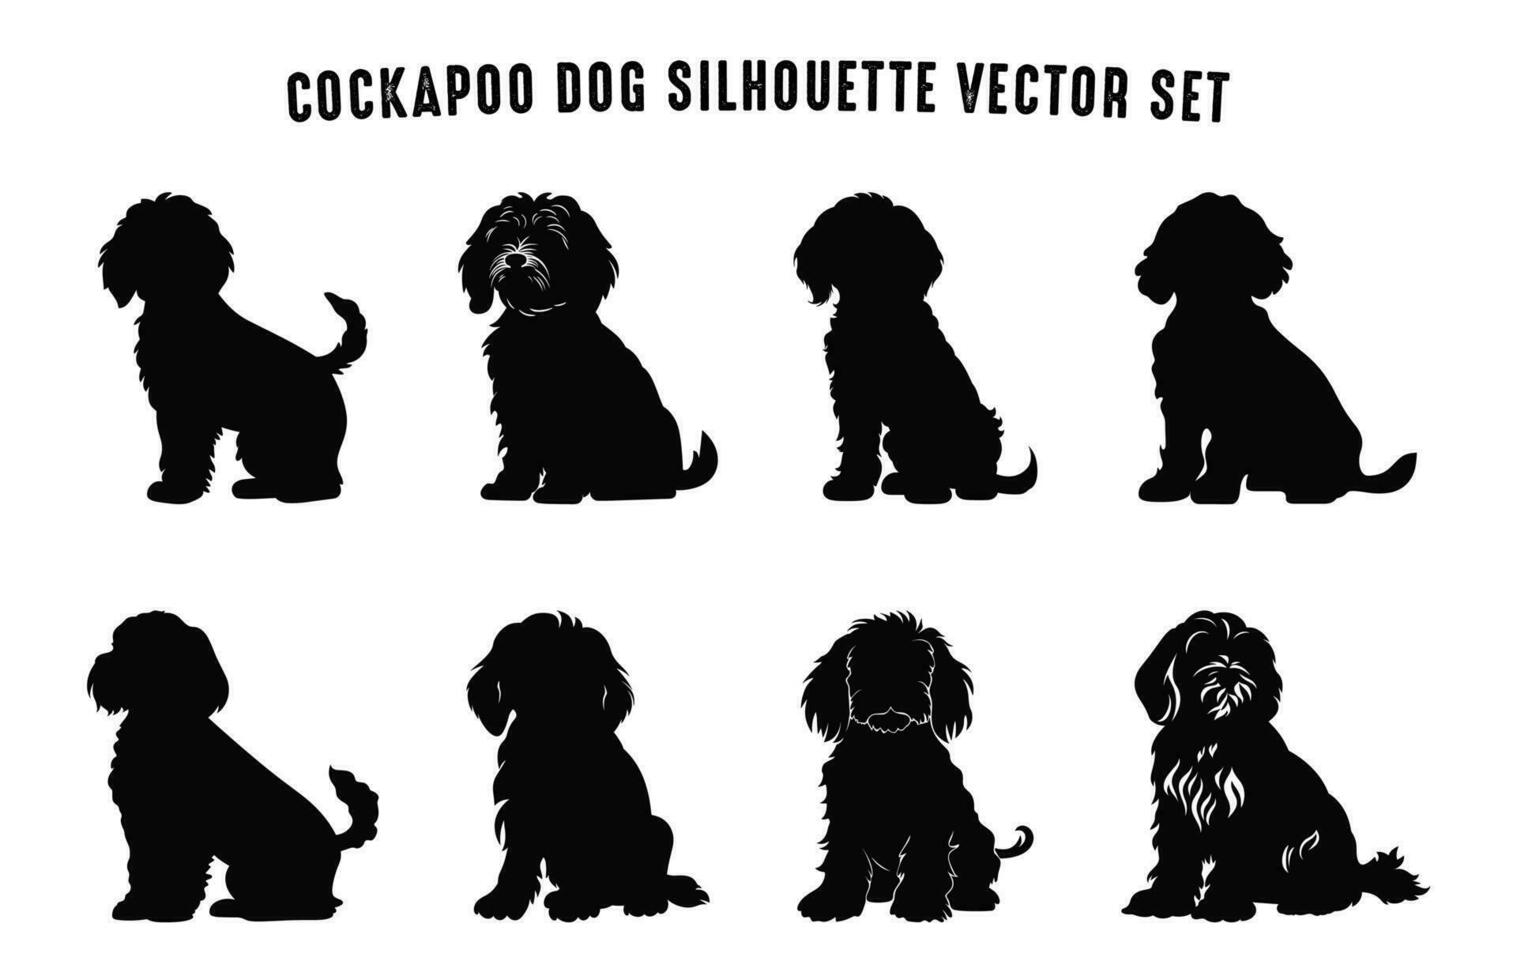 Cockapoo Dog Silhouettes vector Collection, Black Silhouette of Dogs Breed Bundle